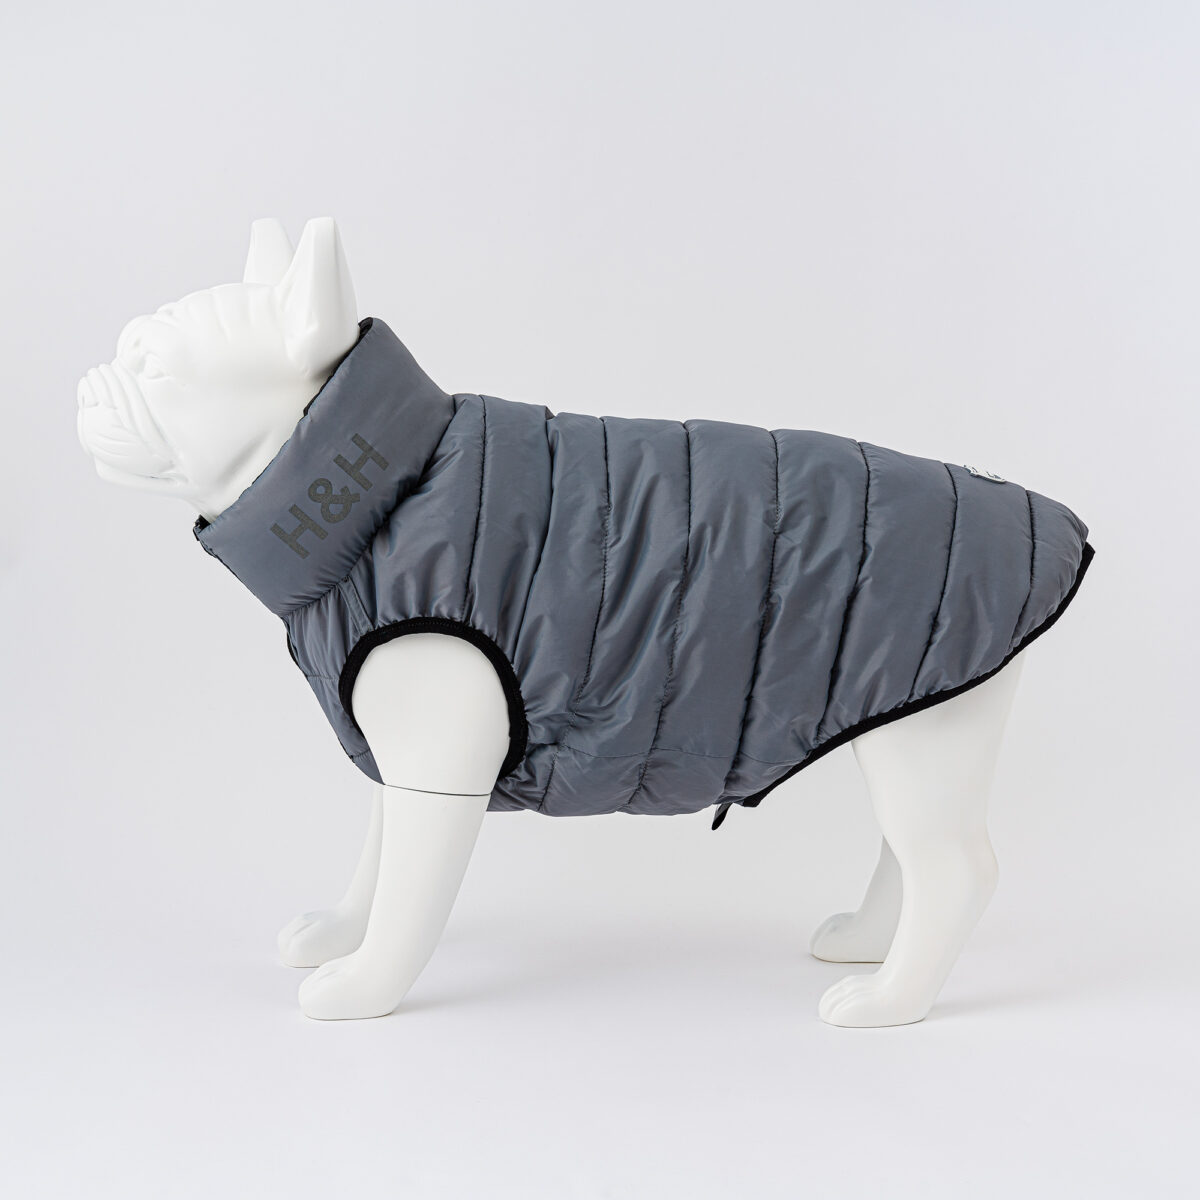 Hugo & Hudson Reversible Dog Puffer Jacket - Black and Grey | Water Resistant | Collar Attachment Hole from Catdog Store